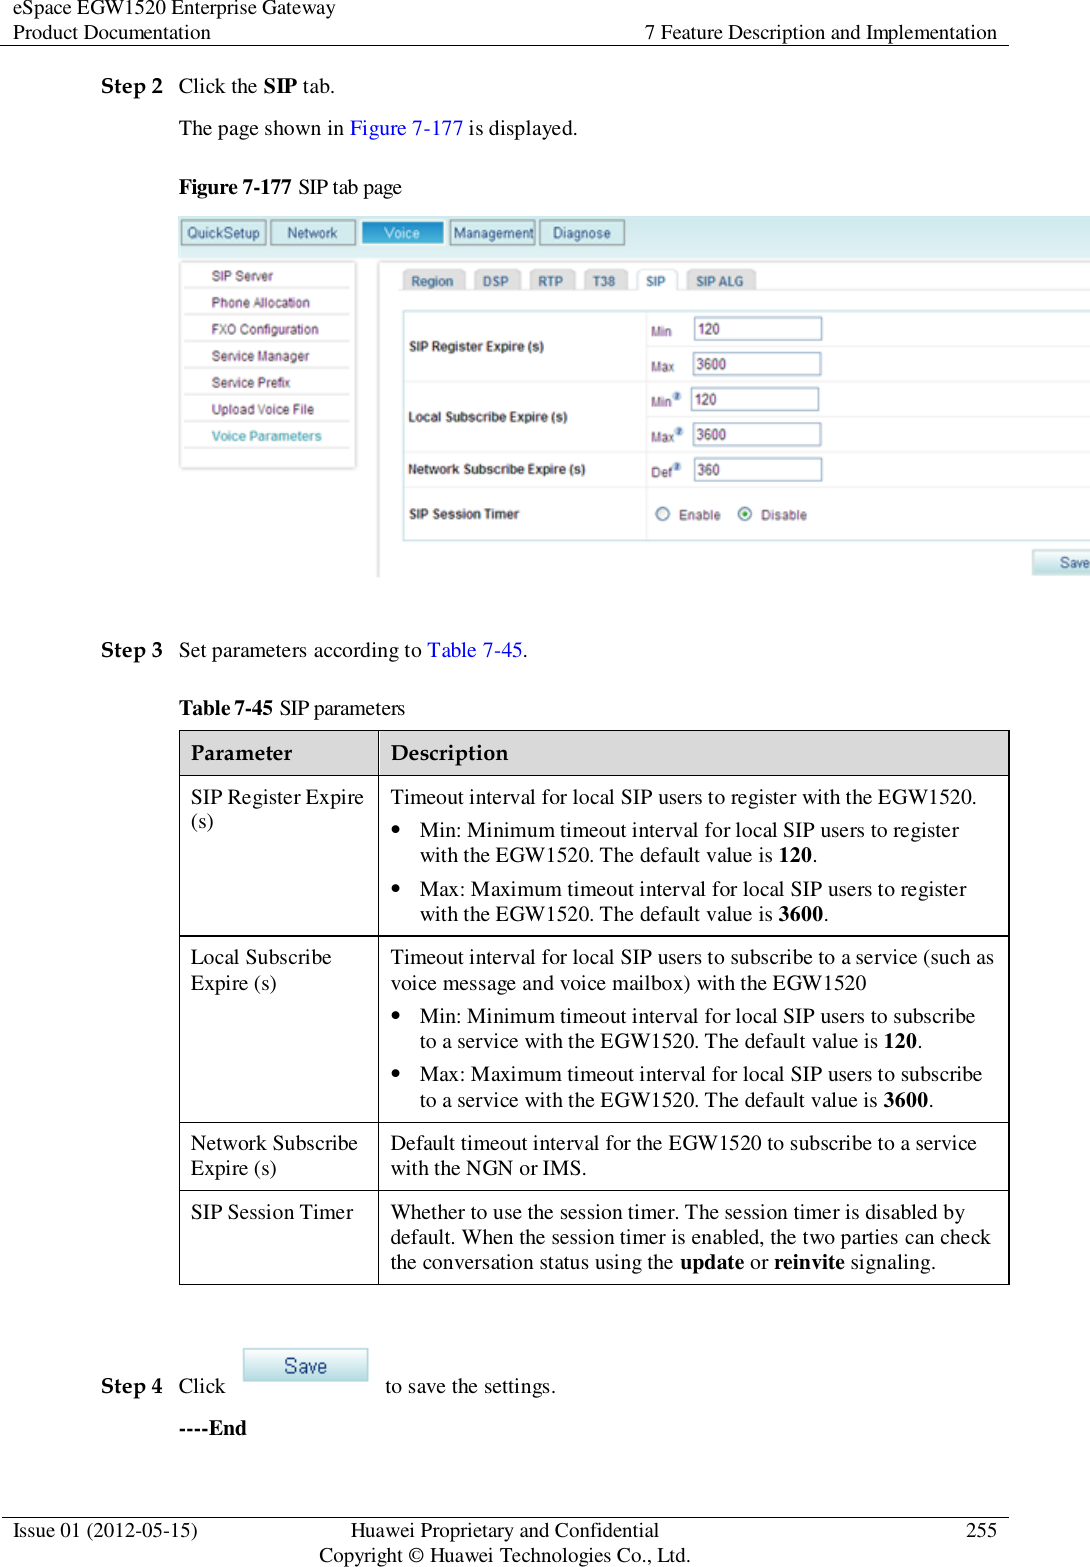 eSpace EGW1520 Enterprise Gateway Product Documentation 7 Feature Description and Implementation  Issue 01 (2012-05-15) Huawei Proprietary and Confidential                                     Copyright © Huawei Technologies Co., Ltd. 255  Step 2 Click the SIP tab. The page shown in Figure 7-177 is displayed. Figure 7-177 SIP tab page   Step 3 Set parameters according to Table 7-45. Table 7-45 SIP parameters Parameter Description SIP Register Expire (s) Timeout interval for local SIP users to register with the EGW1520.  Min: Minimum timeout interval for local SIP users to register with the EGW1520. The default value is 120.  Max: Maximum timeout interval for local SIP users to register with the EGW1520. The default value is 3600. Local Subscribe Expire (s) Timeout interval for local SIP users to subscribe to a service (such as voice message and voice mailbox) with the EGW1520  Min: Minimum timeout interval for local SIP users to subscribe to a service with the EGW1520. The default value is 120.  Max: Maximum timeout interval for local SIP users to subscribe to a service with the EGW1520. The default value is 3600. Network Subscribe Expire (s) Default timeout interval for the EGW1520 to subscribe to a service with the NGN or IMS. SIP Session Timer Whether to use the session timer. The session timer is disabled by default. When the session timer is enabled, the two parties can check the conversation status using the update or reinvite signaling.  Step 4 Click    to save the settings. ----End 